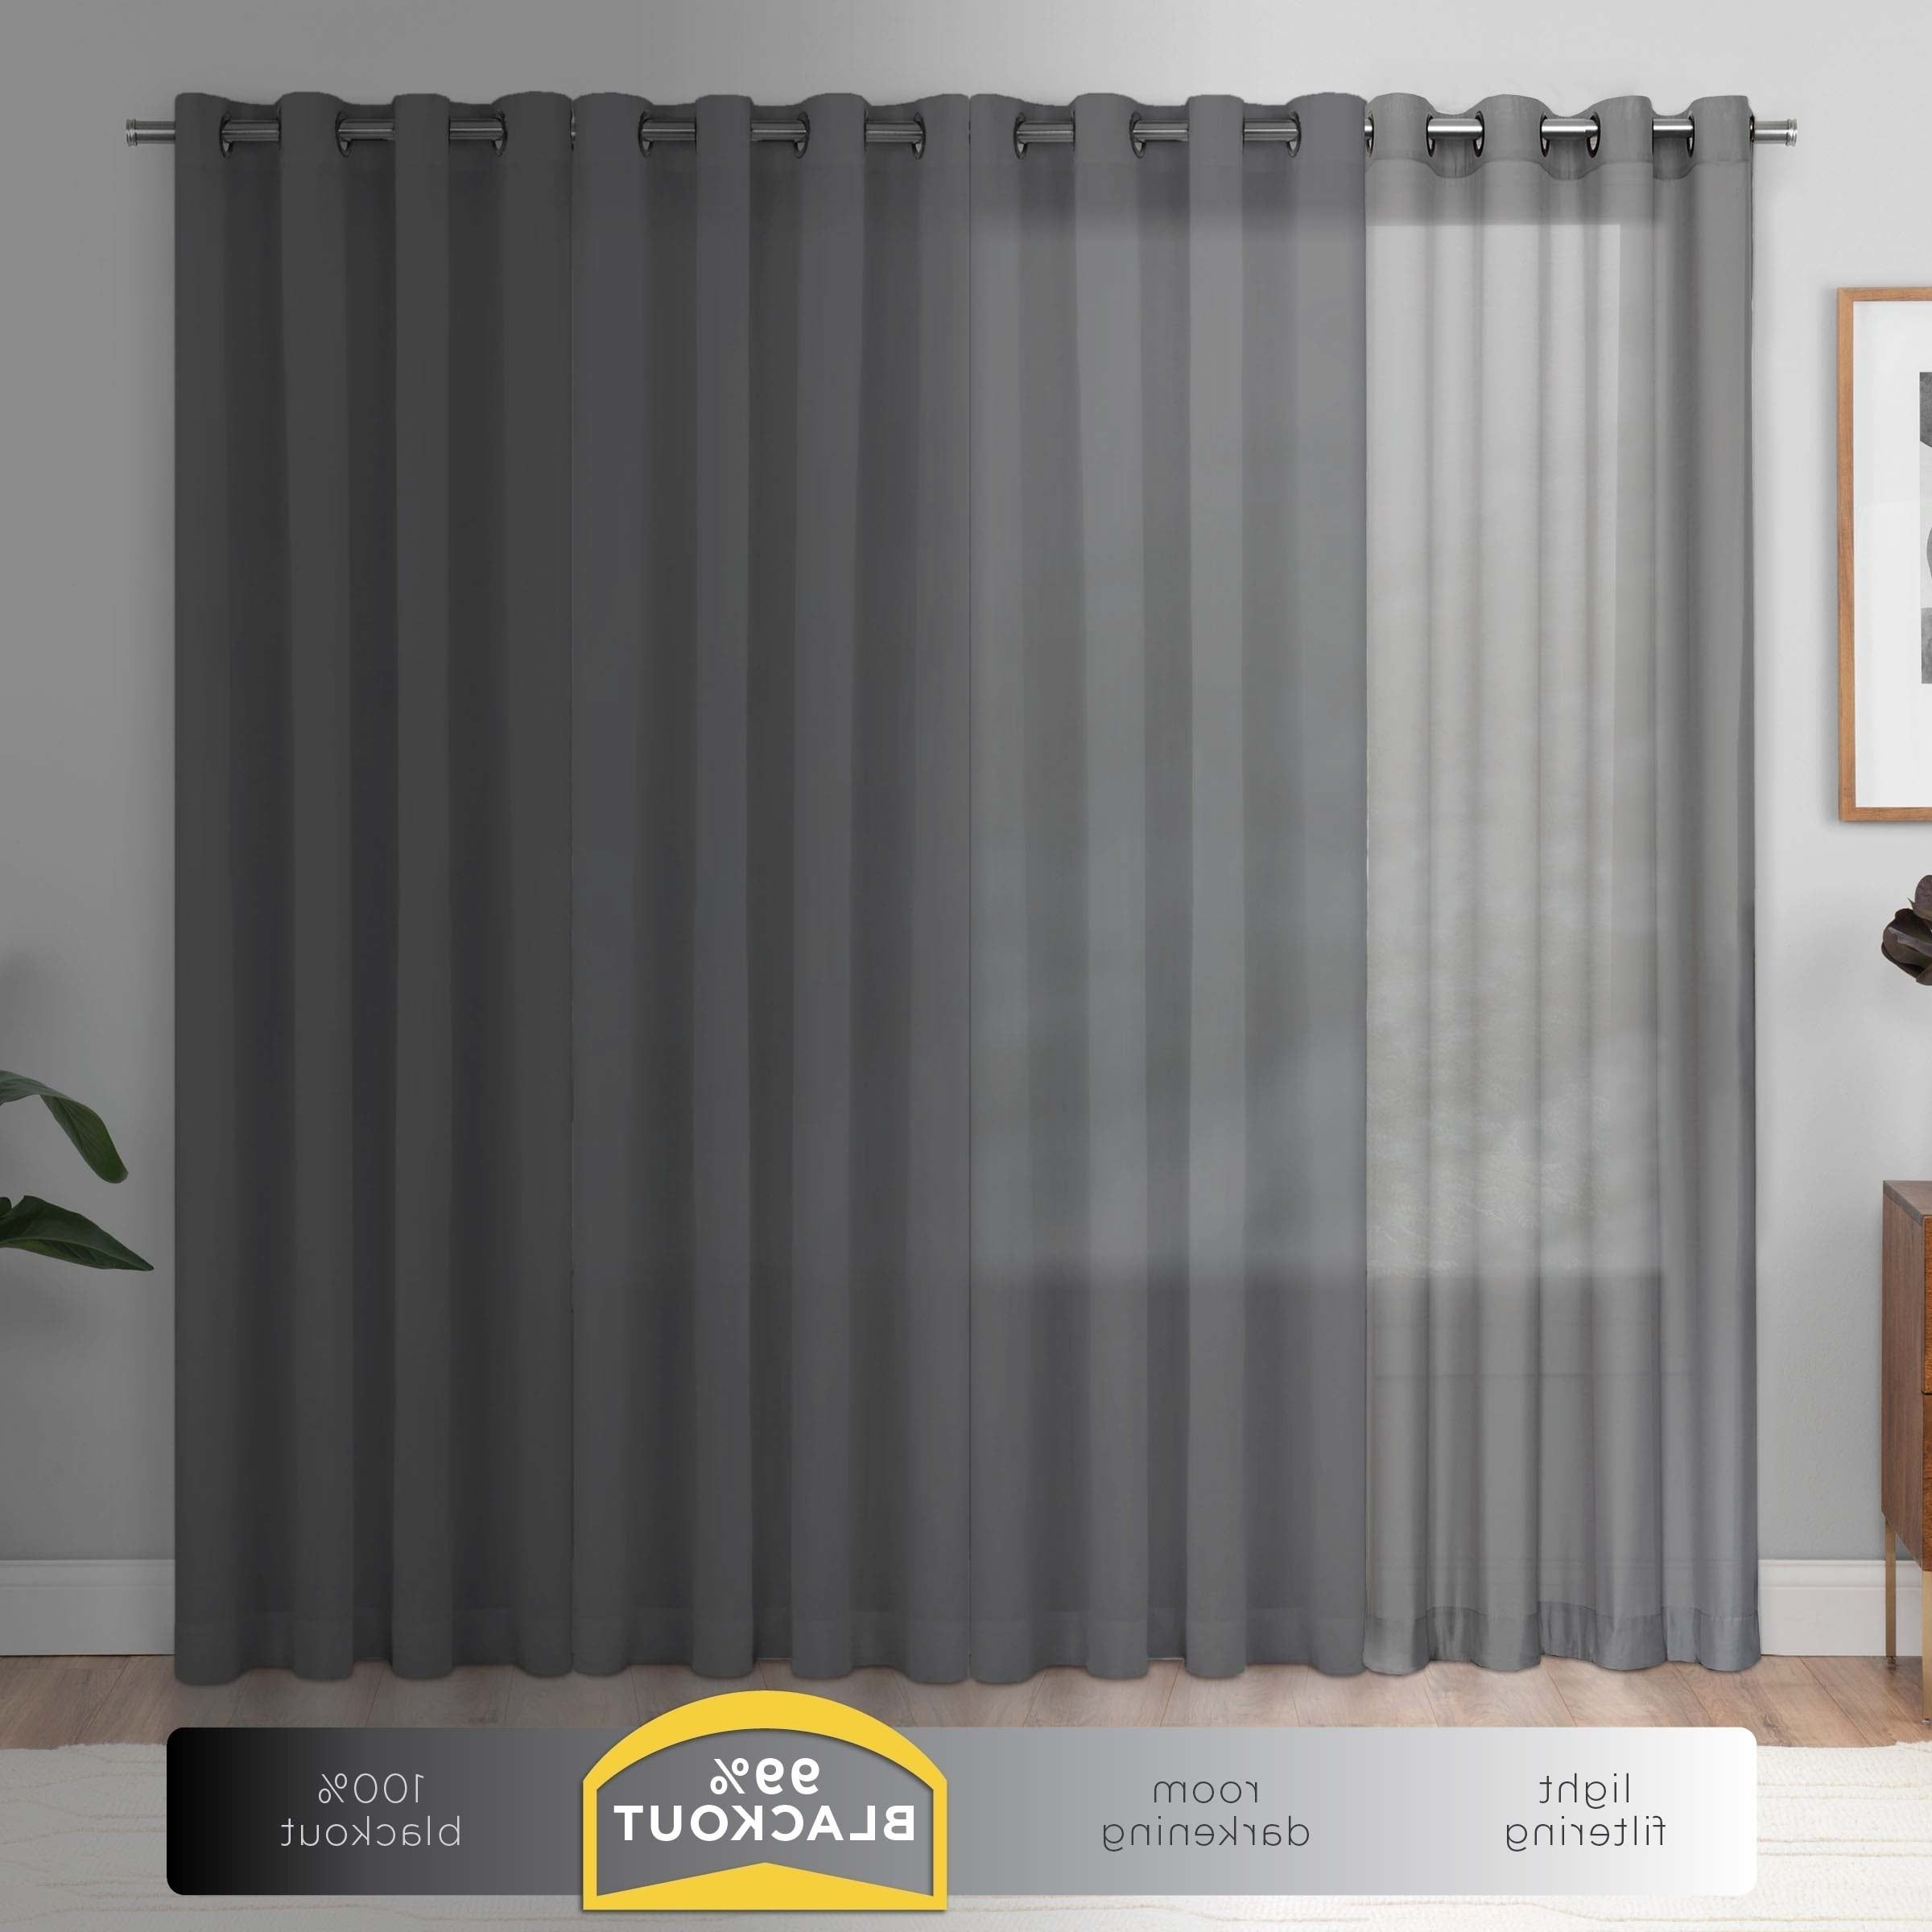 Well Known Thermaback Blackout Window Curtains Pertaining To Eclipse Suzi Thermaback Blackout Window Curtain (View 3 of 20)